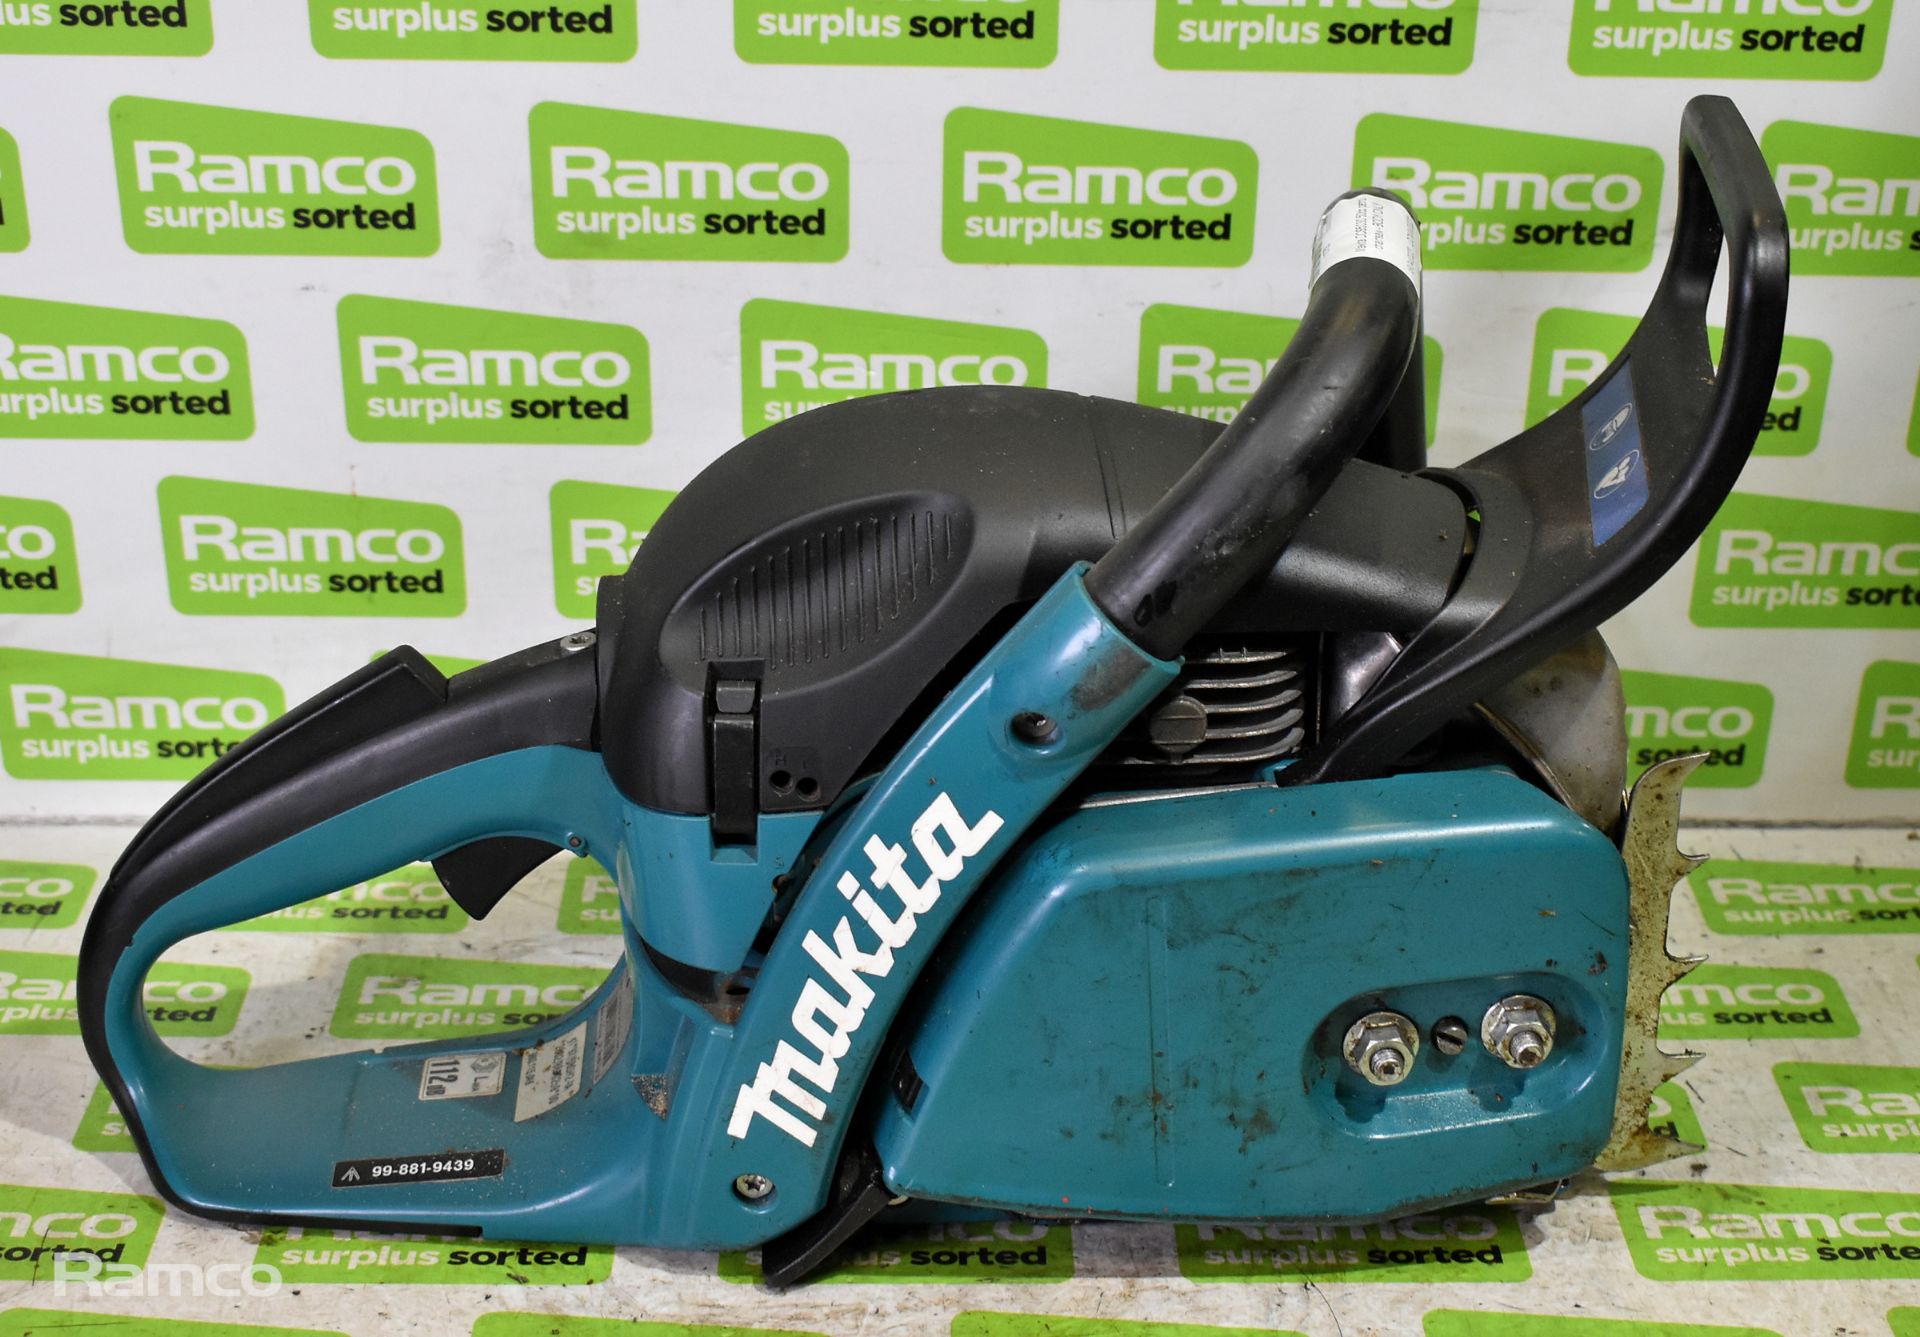 4x Makita DCS5030 50cc petrol chainsaws - BODIES ONLY - AS SPARES OR REPAIRS - Image 17 of 21